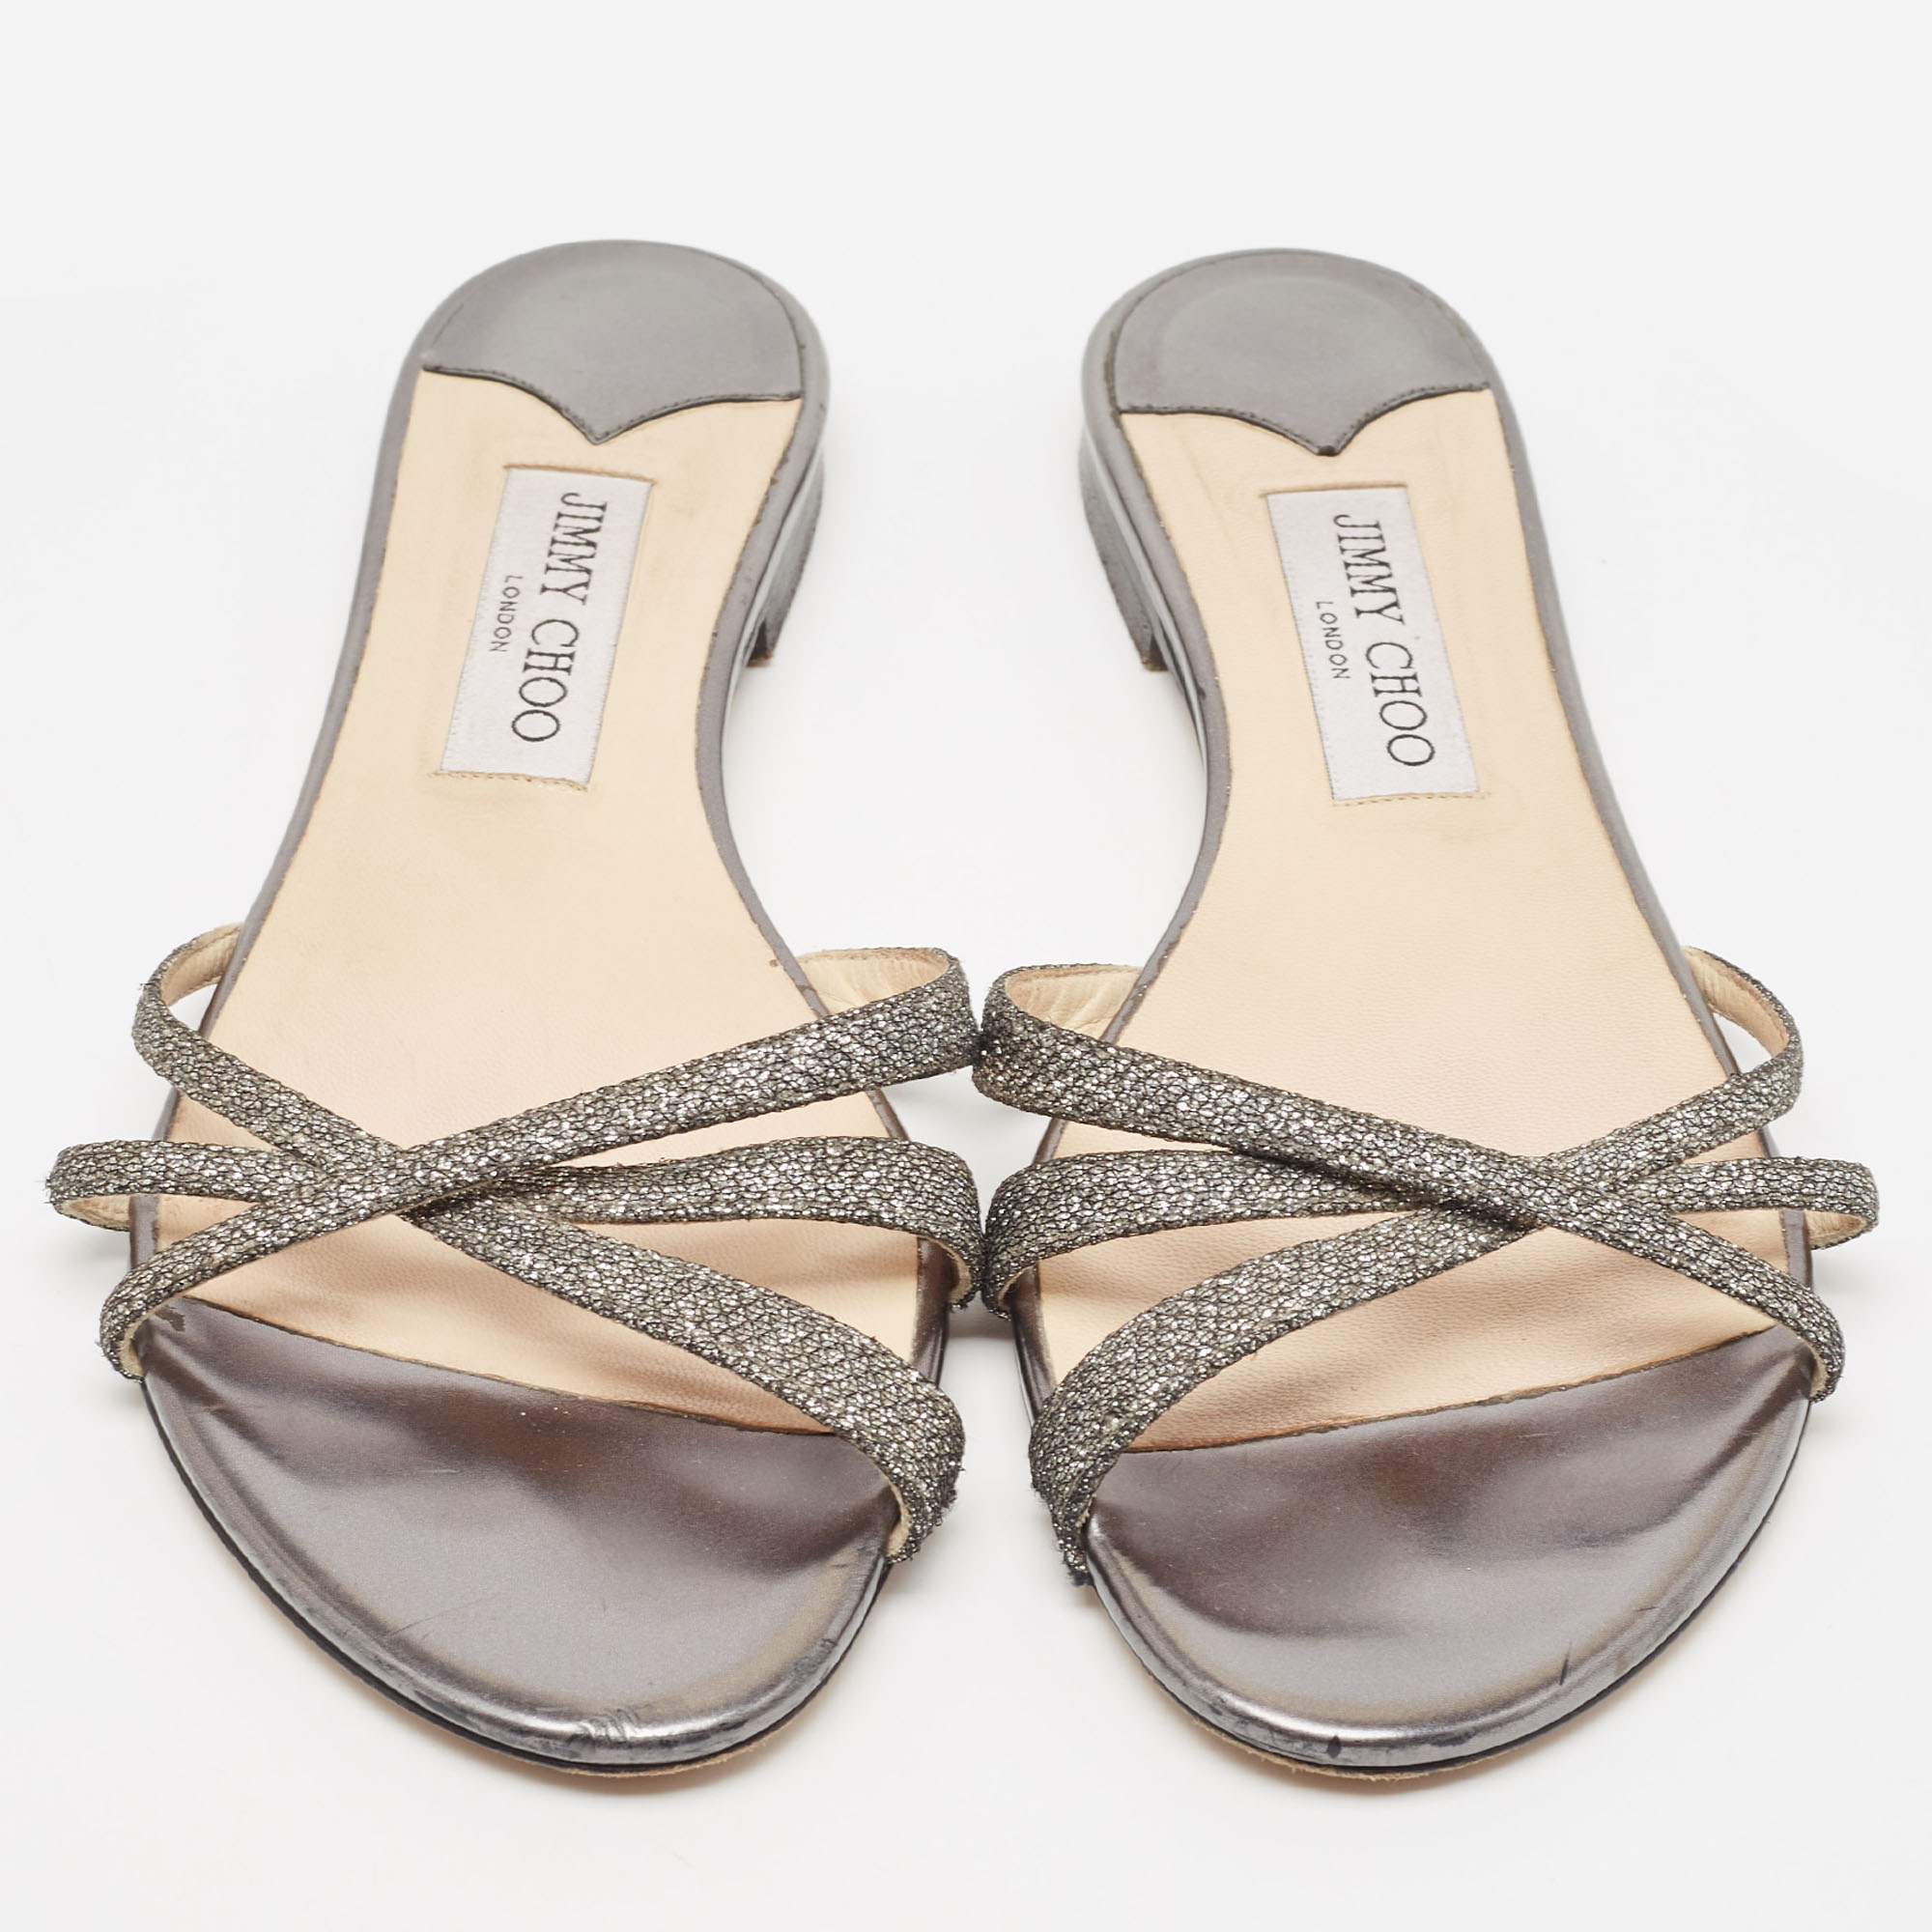 Jimmy Choo Metallic Glitter And Leather Strappy Flat Sandals Size 39